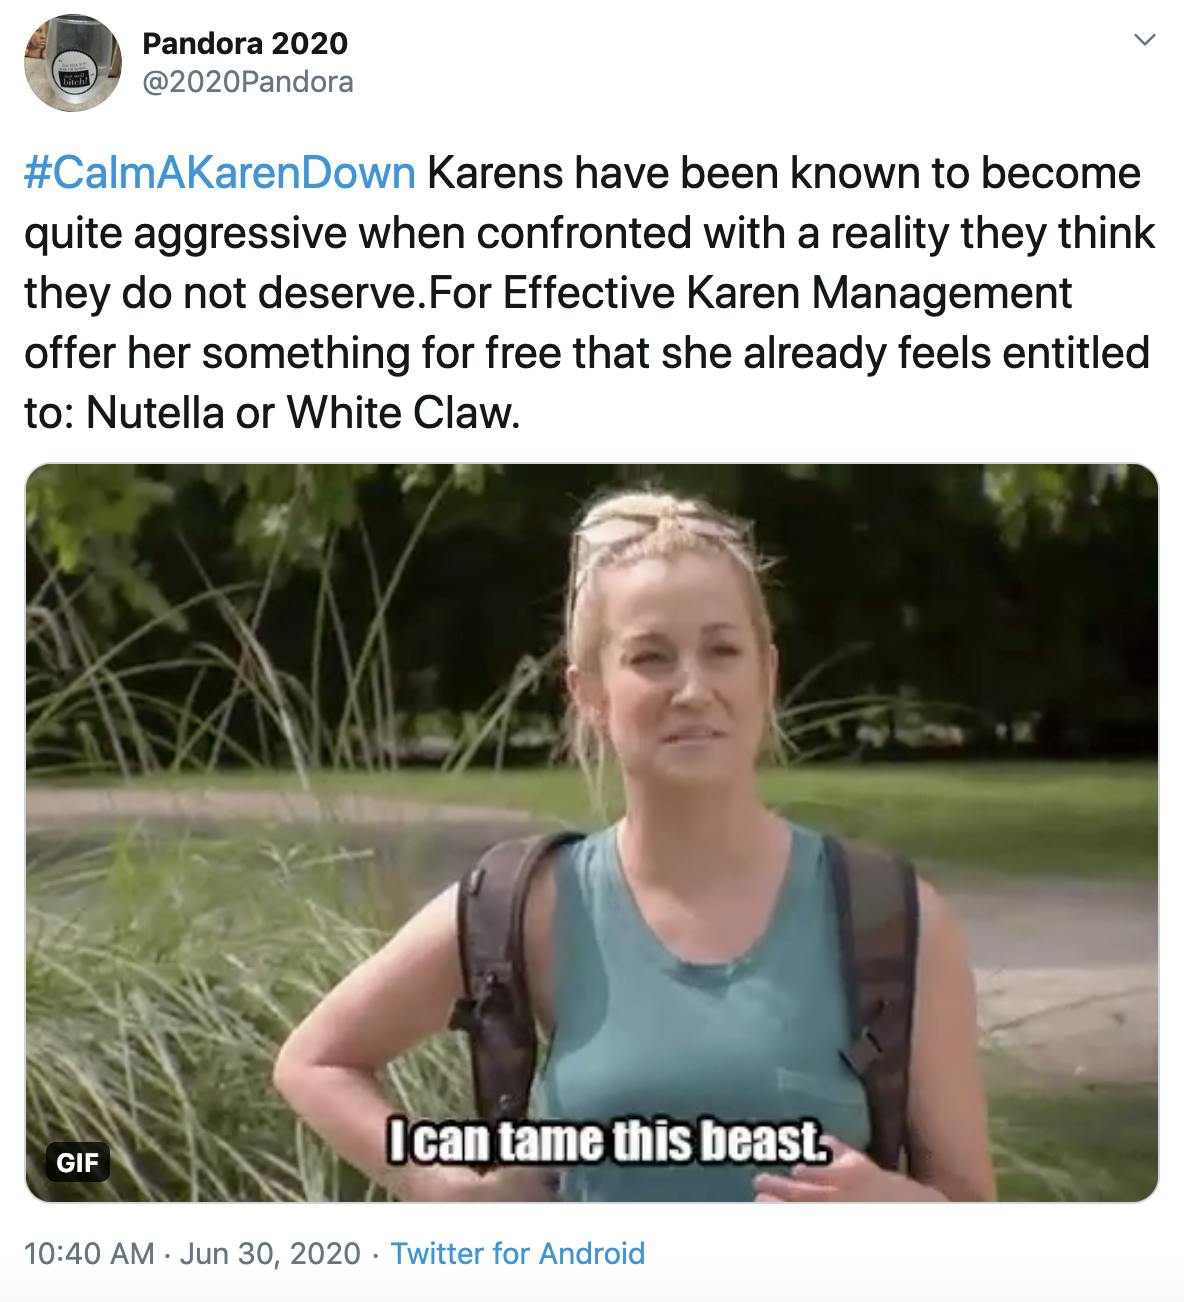 #CalmAKarenDown Karens have been known to become quite aggressive when confronted with a reality they think they do not deserve.For Effective Karen Management offer her something for free that she already feels entitled to: Nutella or White Claw.